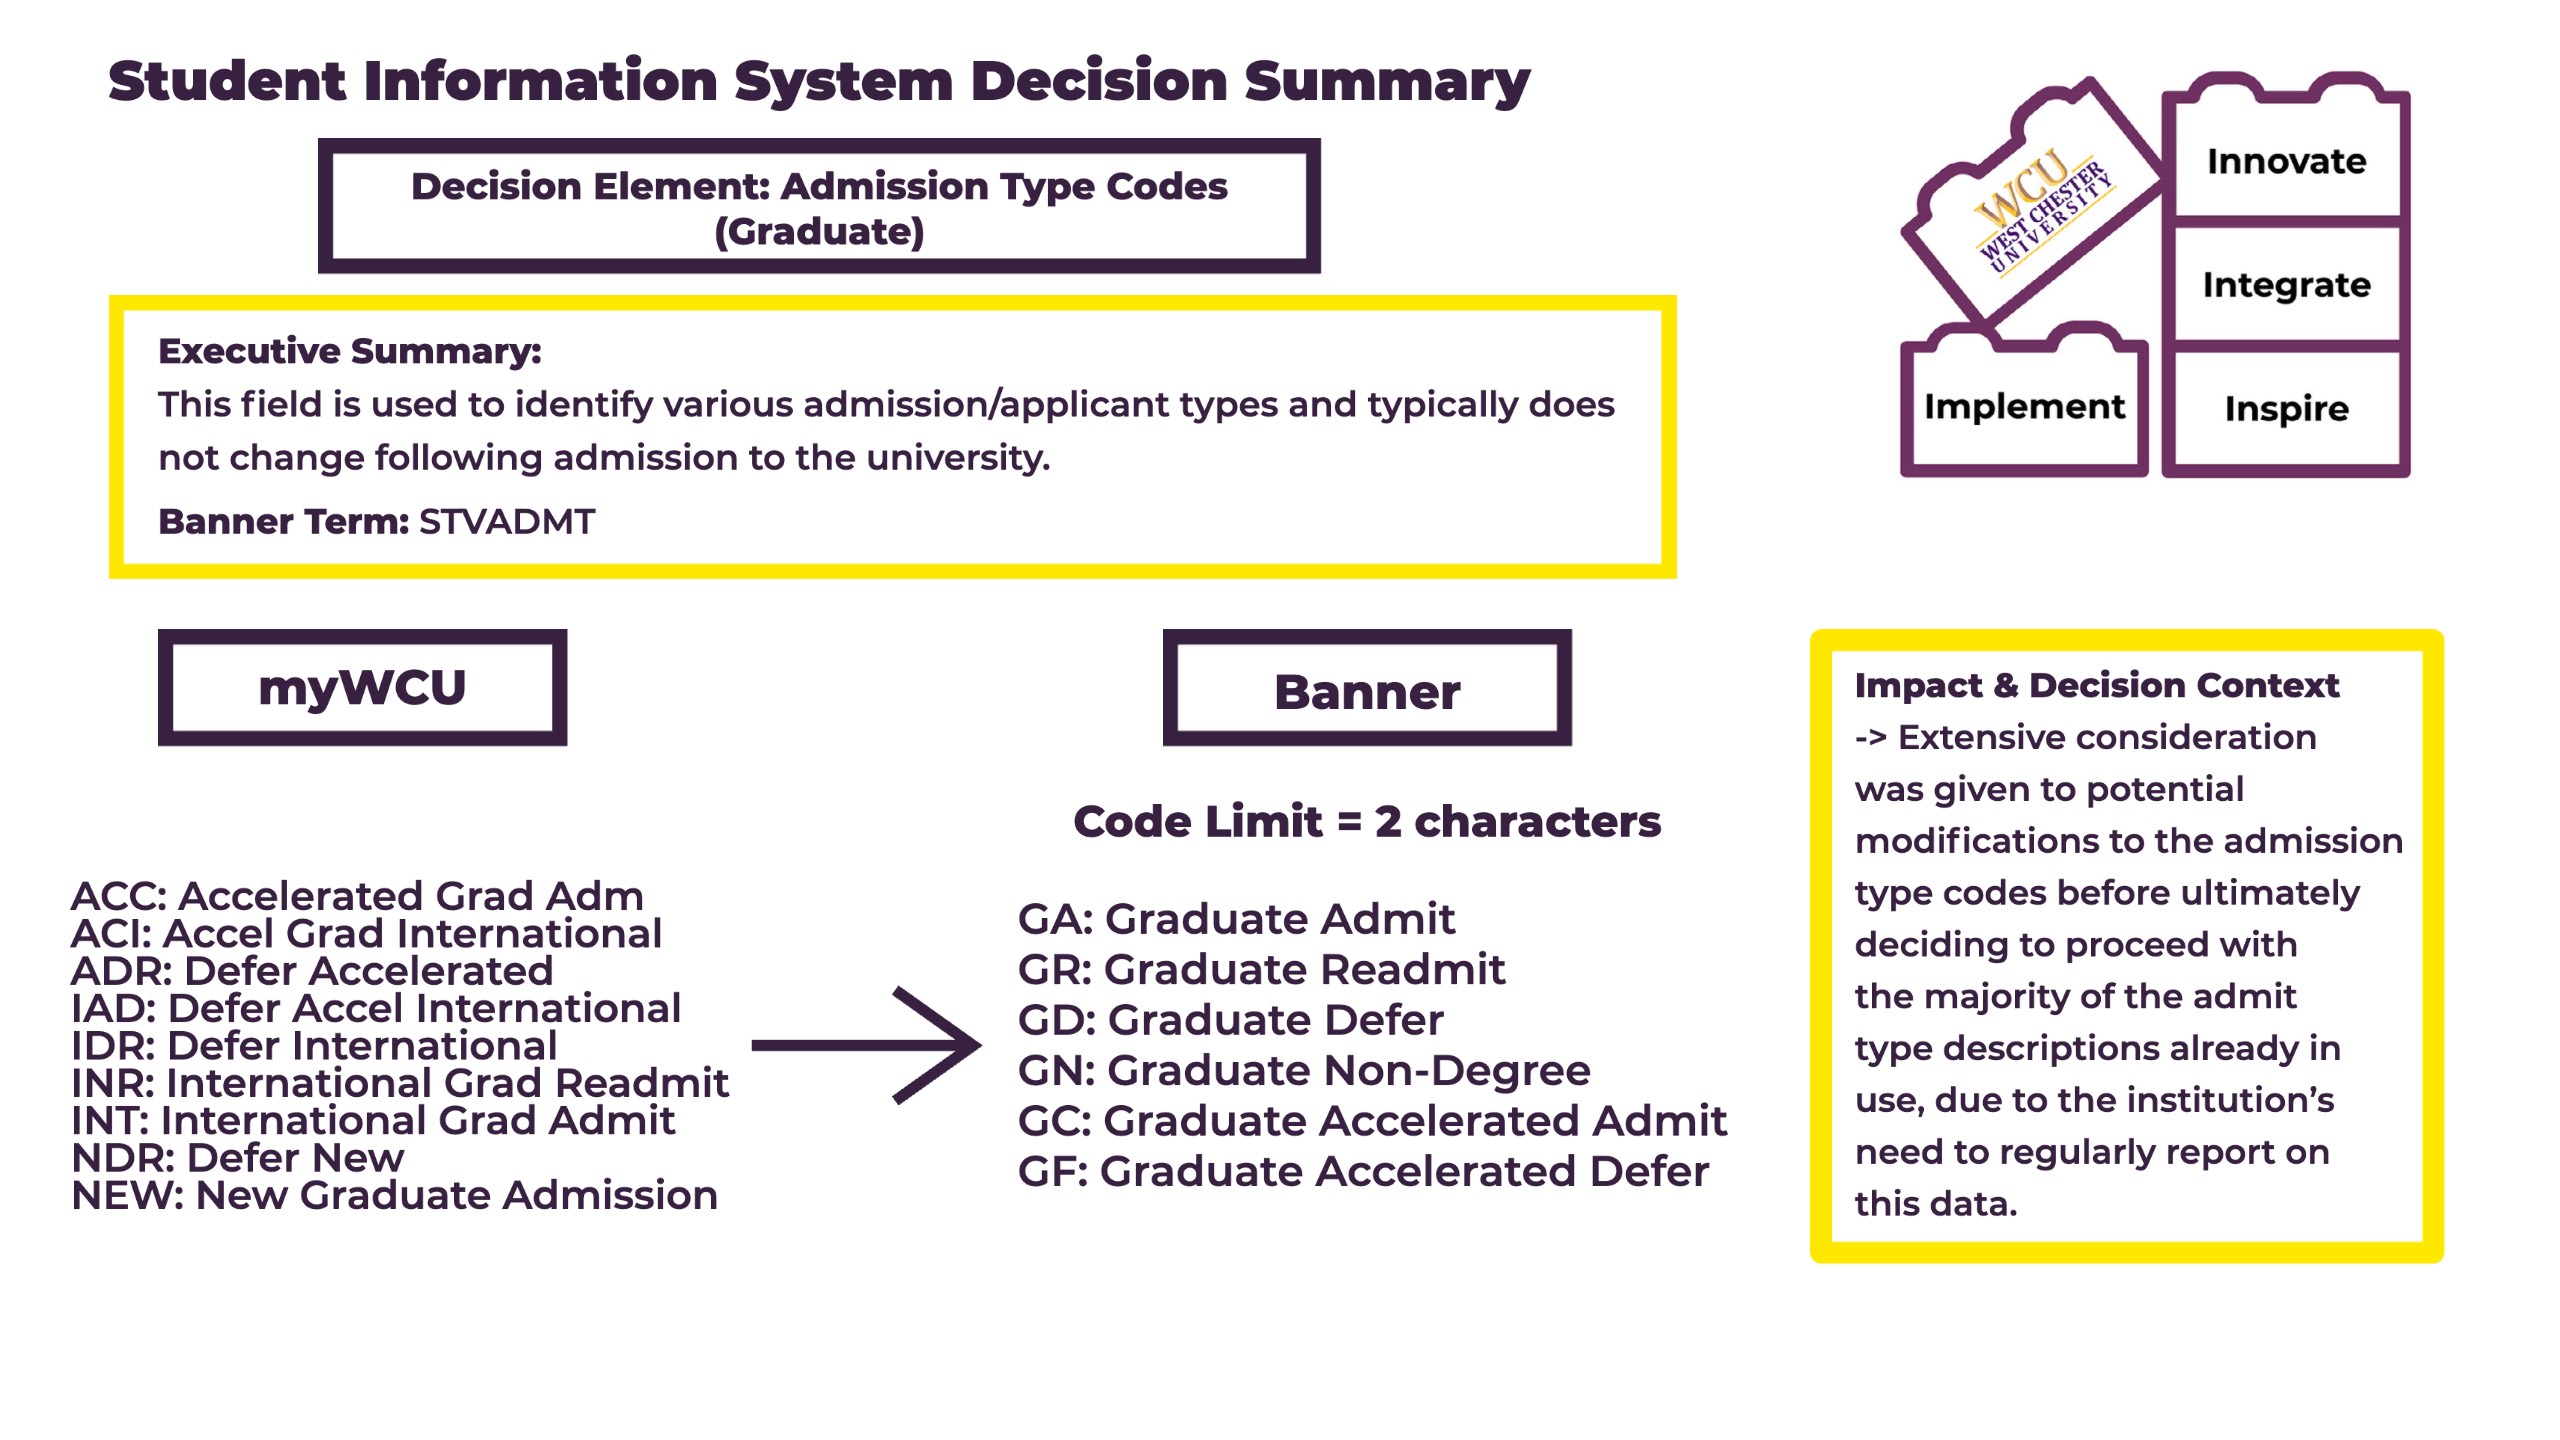   Student Information System Decision Summary Decision Element: Admission Type Codes (Graduate) WCU WEST CHESTER UNIVERSITY Innovate Integrate Executive Summary: This field is used to identify various admission/applicant types and typically does not change following admission to the university. Banner Term: STVADMT Implement Inspire myWCU ACC: Accelerated Grad Adm ACI: Accel Grad International ADR: Defer Accelerated IAD: Defer Accel International IDR: Defer International INR: International Grad Readmit INT: International Grad Admit NDR: Defer New NEW: New Graduate Admission ↑ Banner Code Limit = 2 characters GA: Graduate Admit GR: Graduate Readmit GD: Graduate Defer GN: Graduate Non-Degree GC: Graduate Accelerated Admit GF: Graduate Accelerated Defer Impact & Decision Context -> Extensive consideration was given to potential modifications to the admission type codes before ultimately deciding to proceed with the majority of the admit type descriptions already in use, due to the institution's need to regularly report on this data.